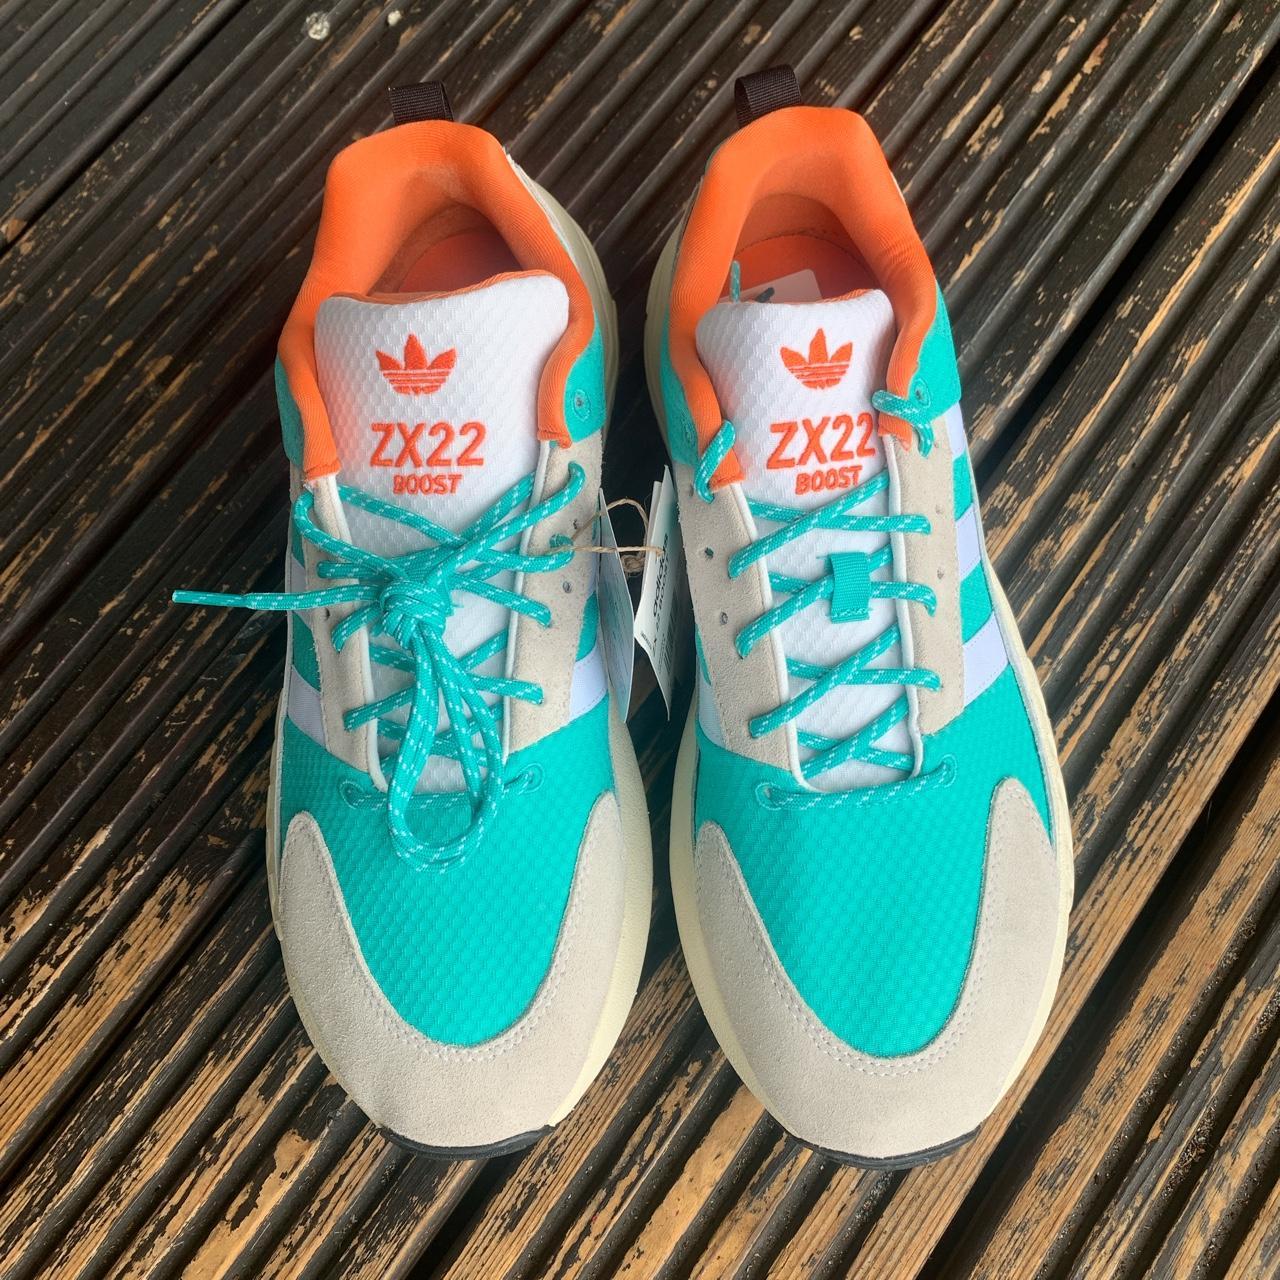 Adidas ZX 22 Boost Shoes size 10 shoes. Brand new - Depop